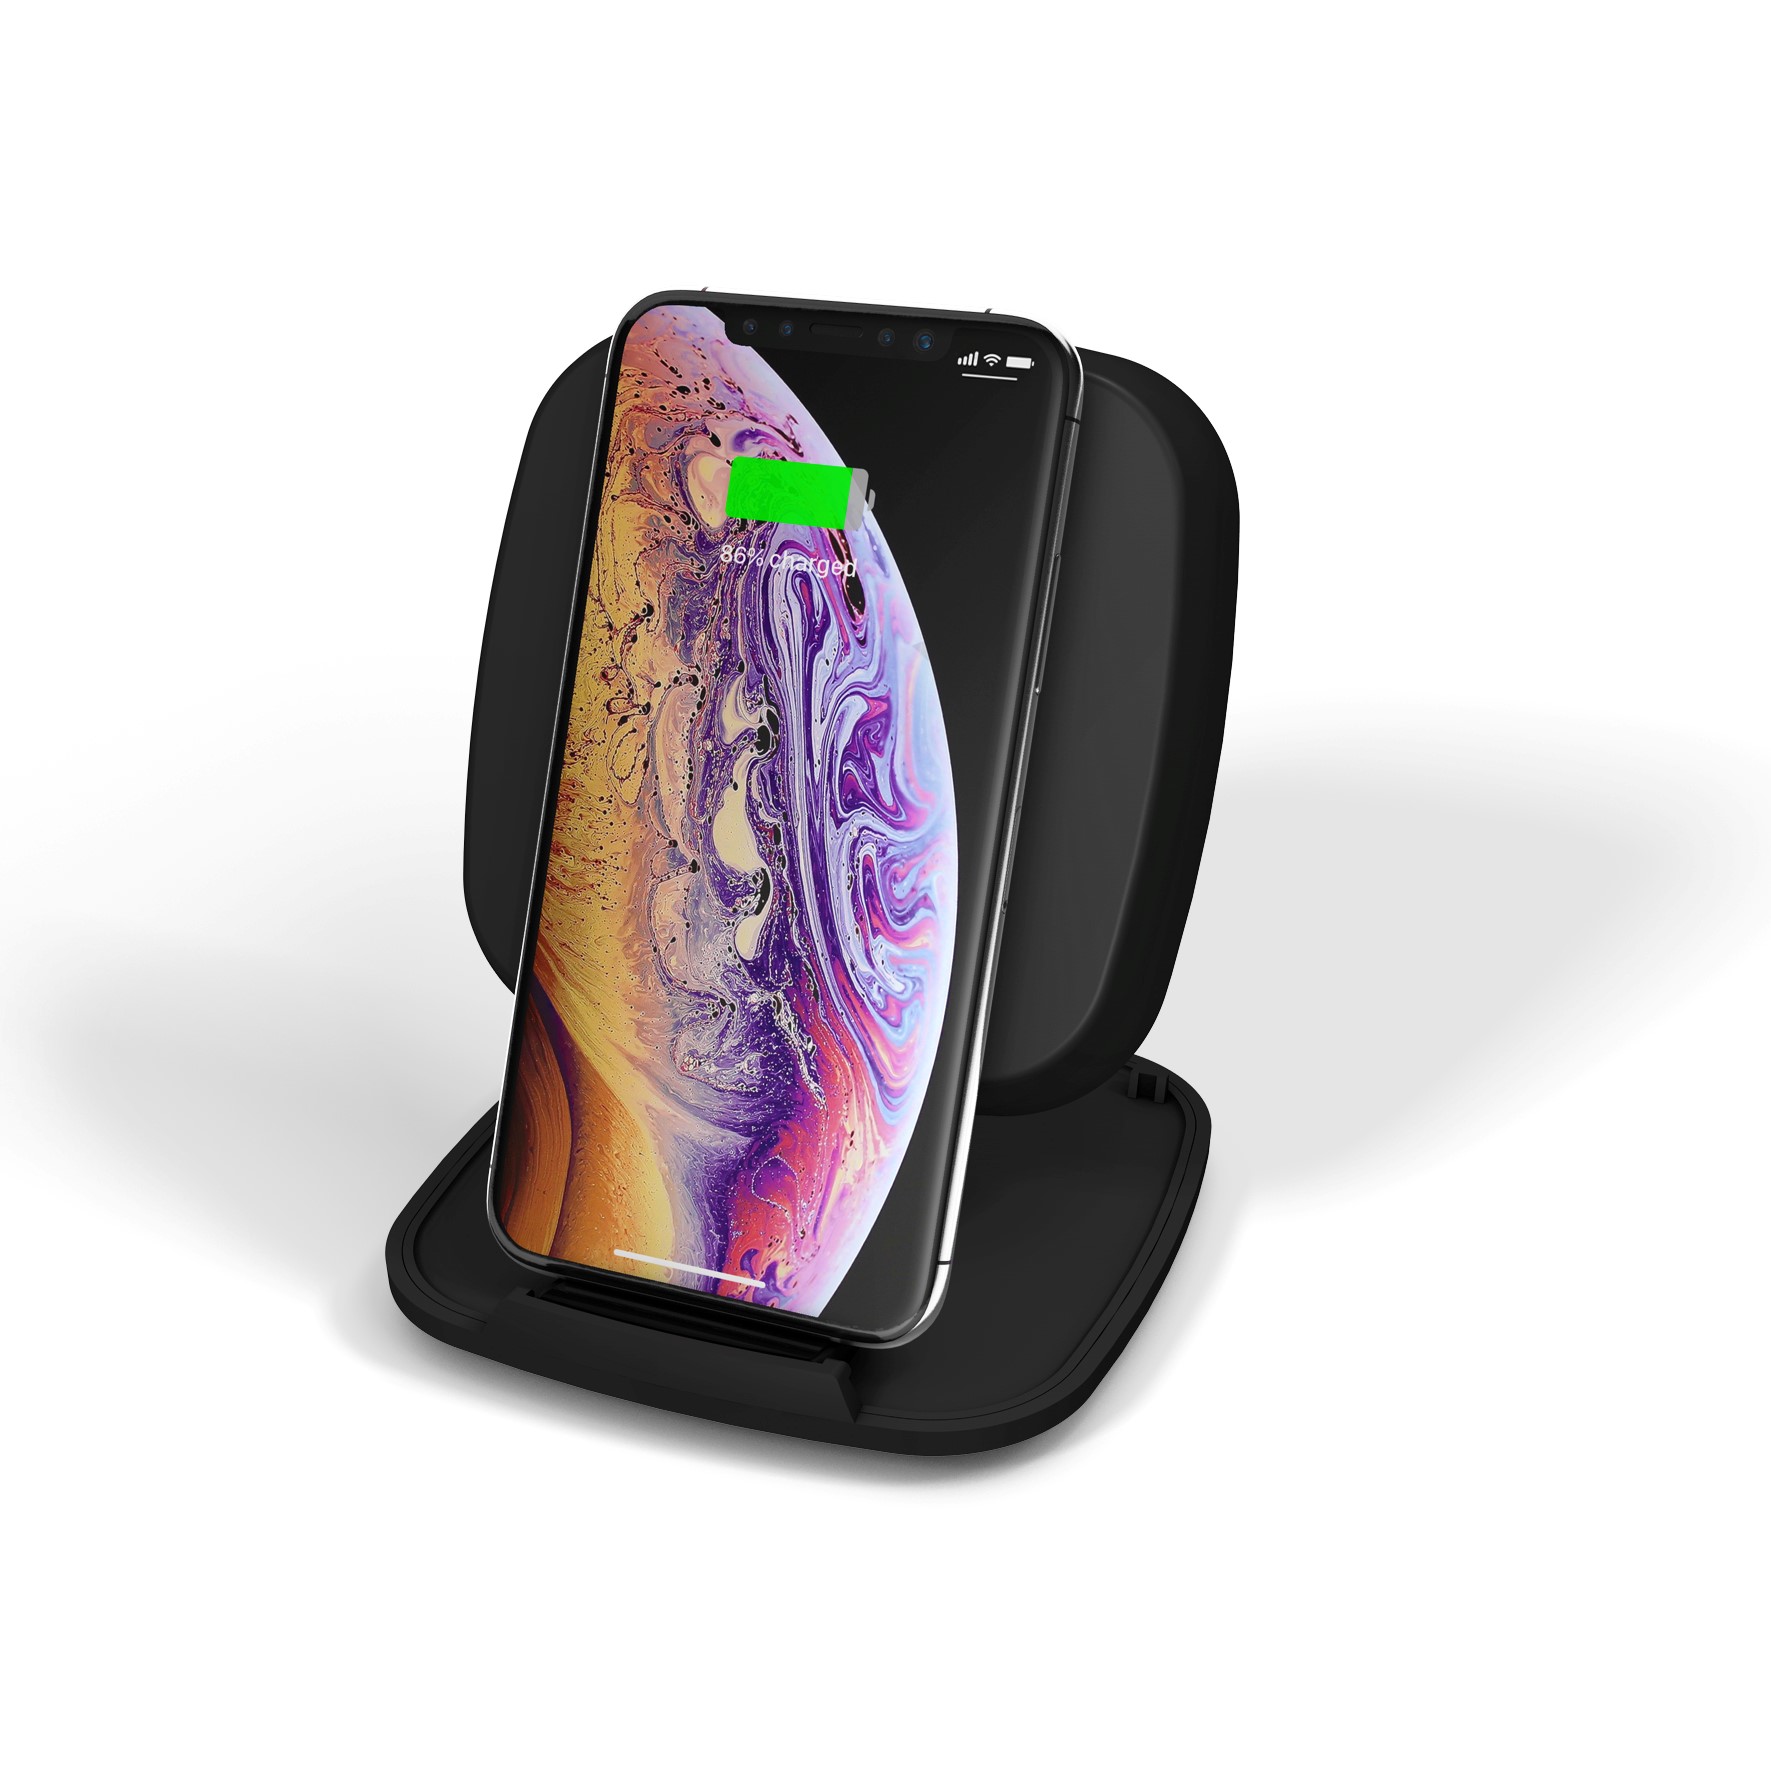 ZESC06B - Zens Fast Wireless Charger Stand Black while charging iPhone XS